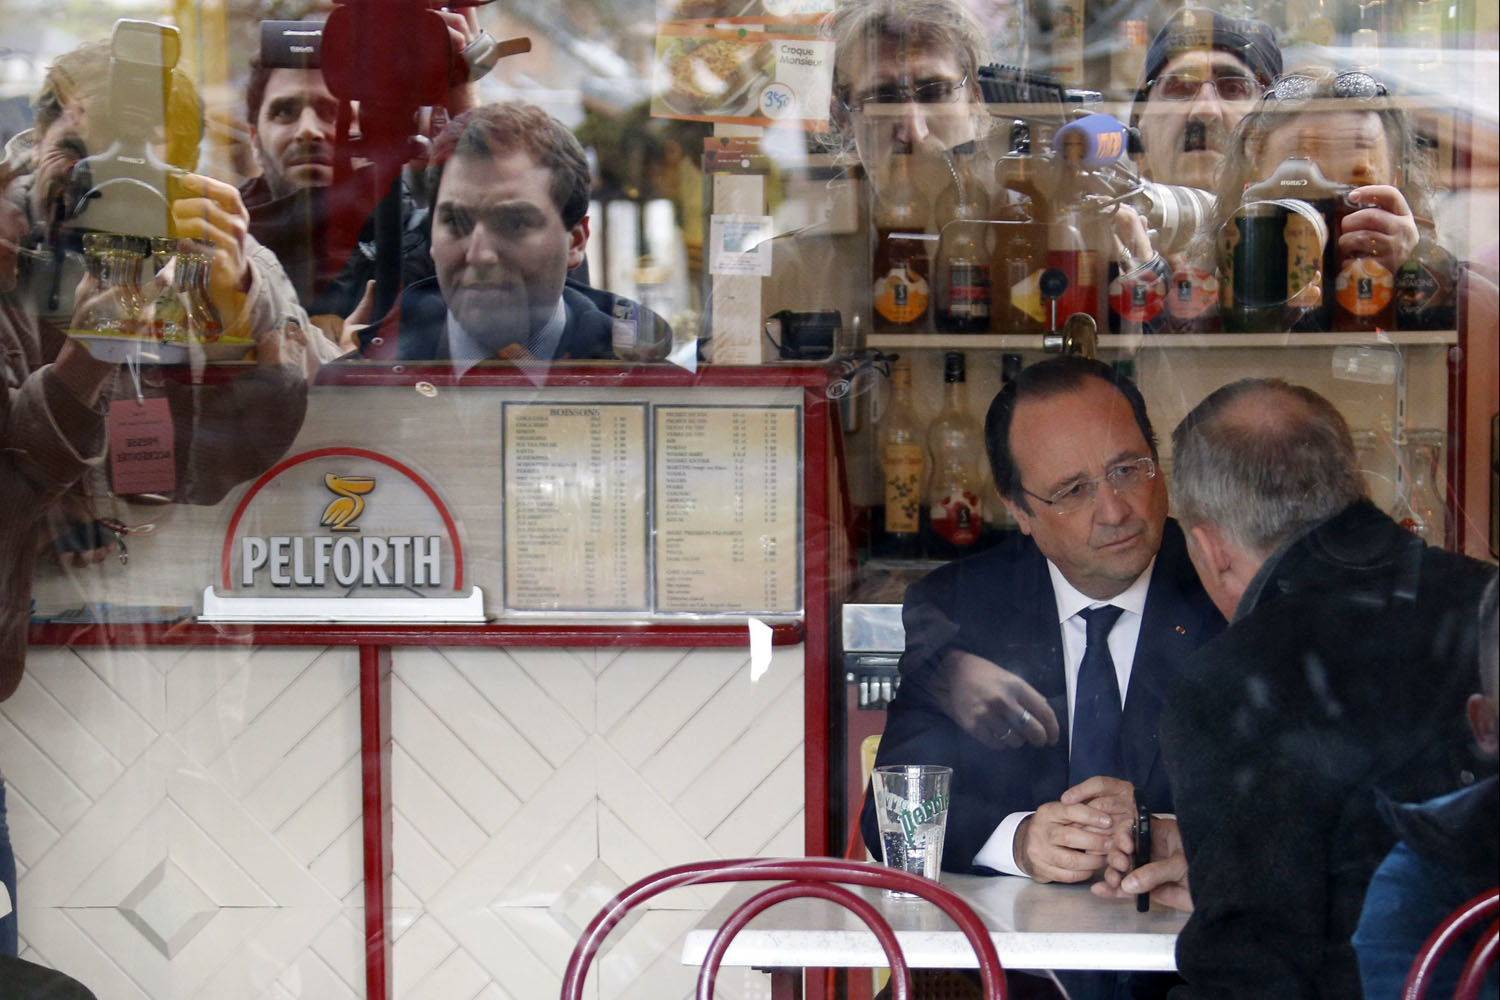 France's President Francois Hollande is seen speaking in a bar after voting in the first round in the French mayoral elections in Tulle